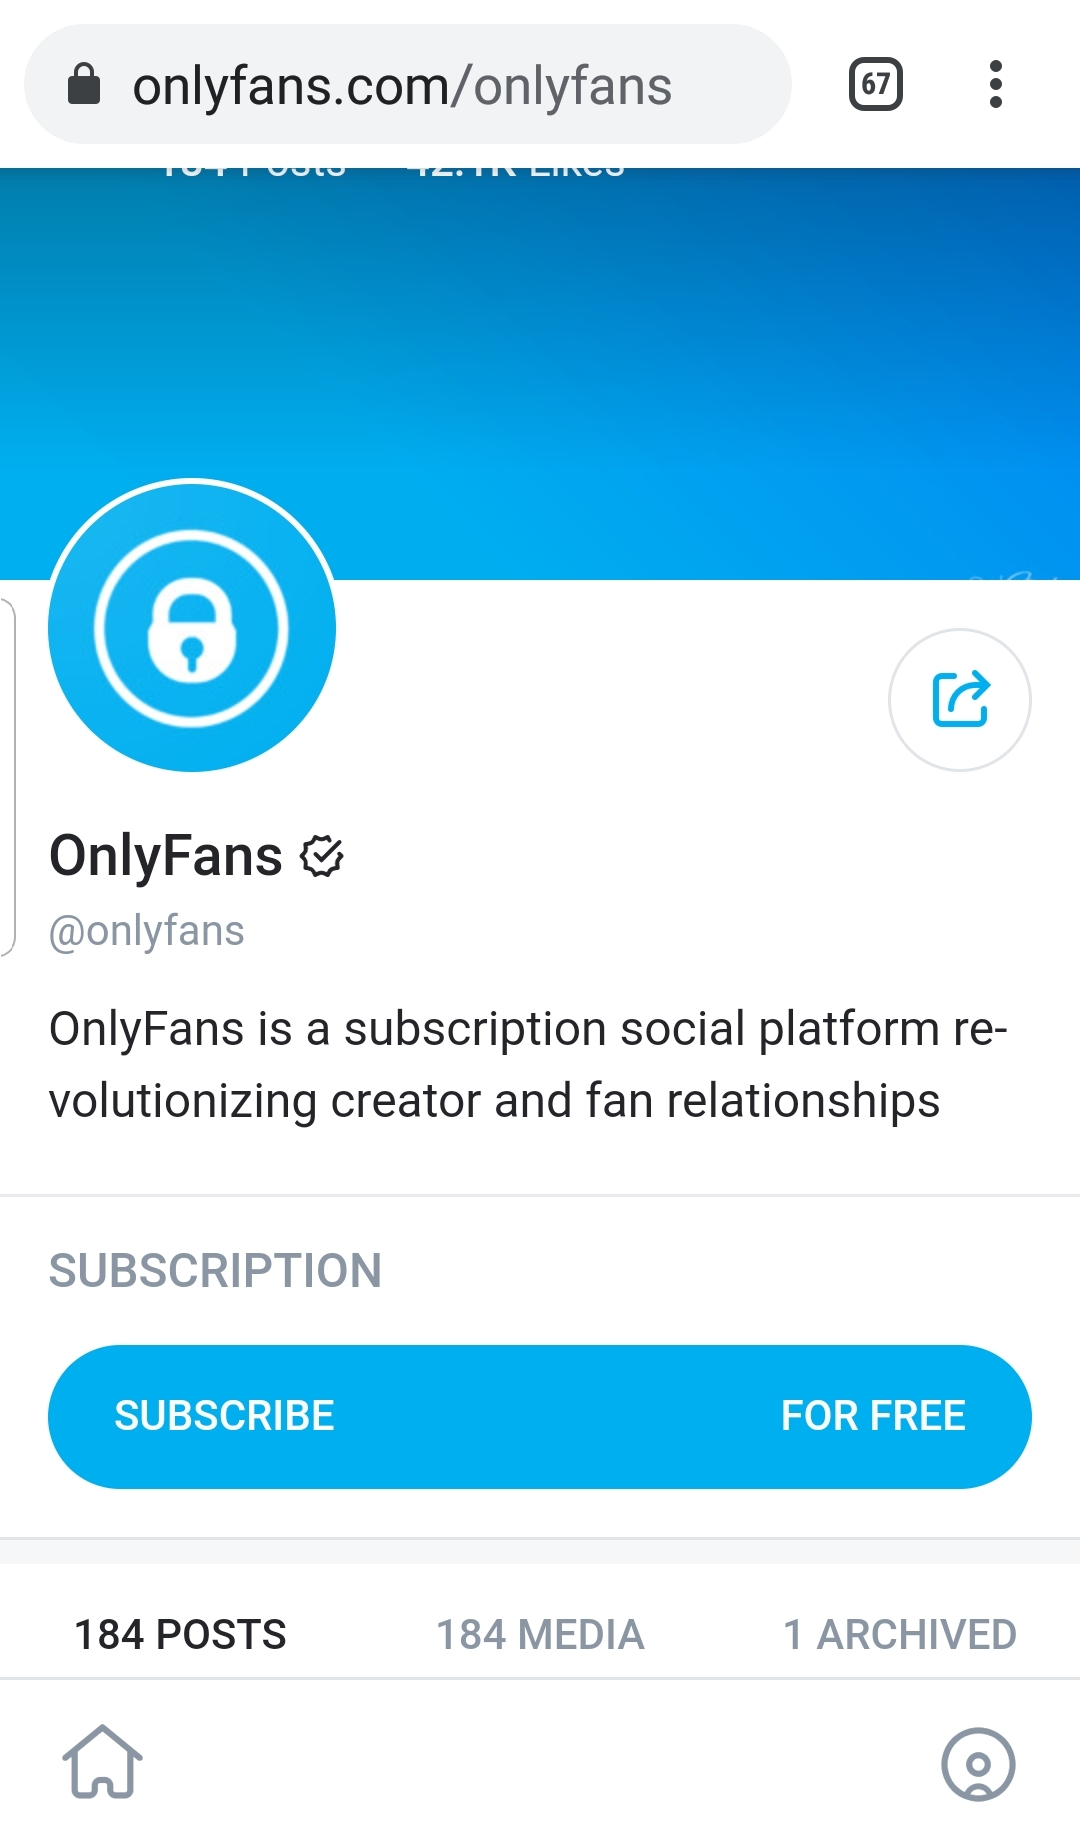 Can you give someone a free subscription on onlyfans